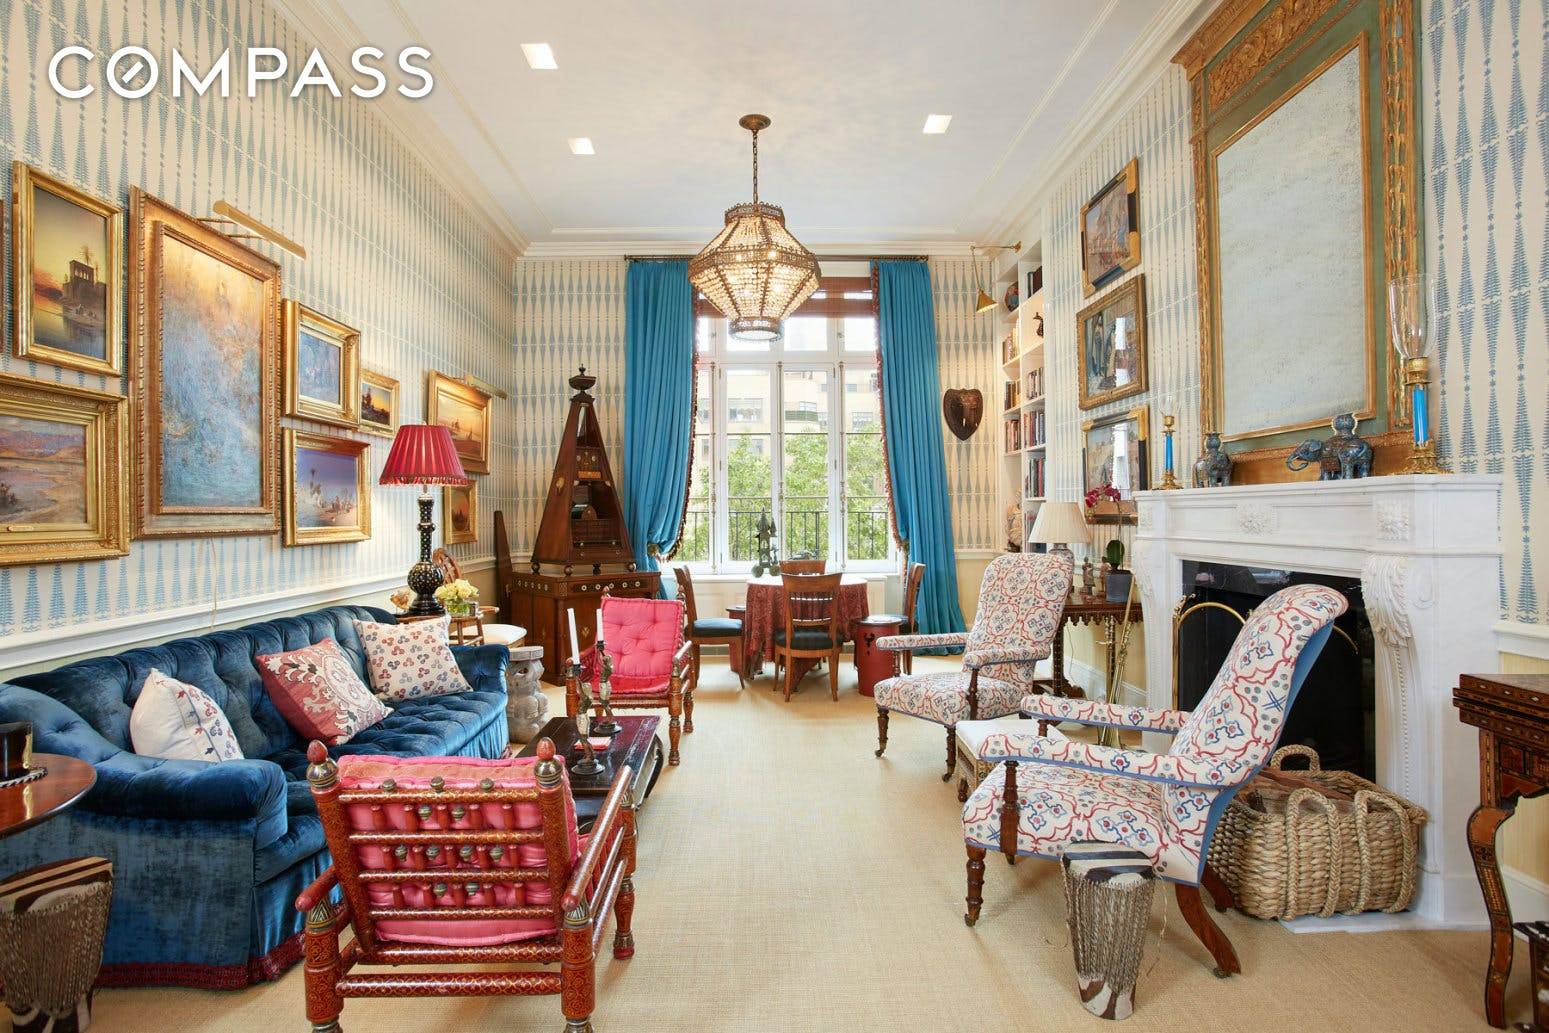 FABULOUS AND UNIQUE This treasure of an apartment, located at 170 East 78th Street, one of the unique Morgan Studio buildings, was thoroughly renovated while retaining original details and adding ...